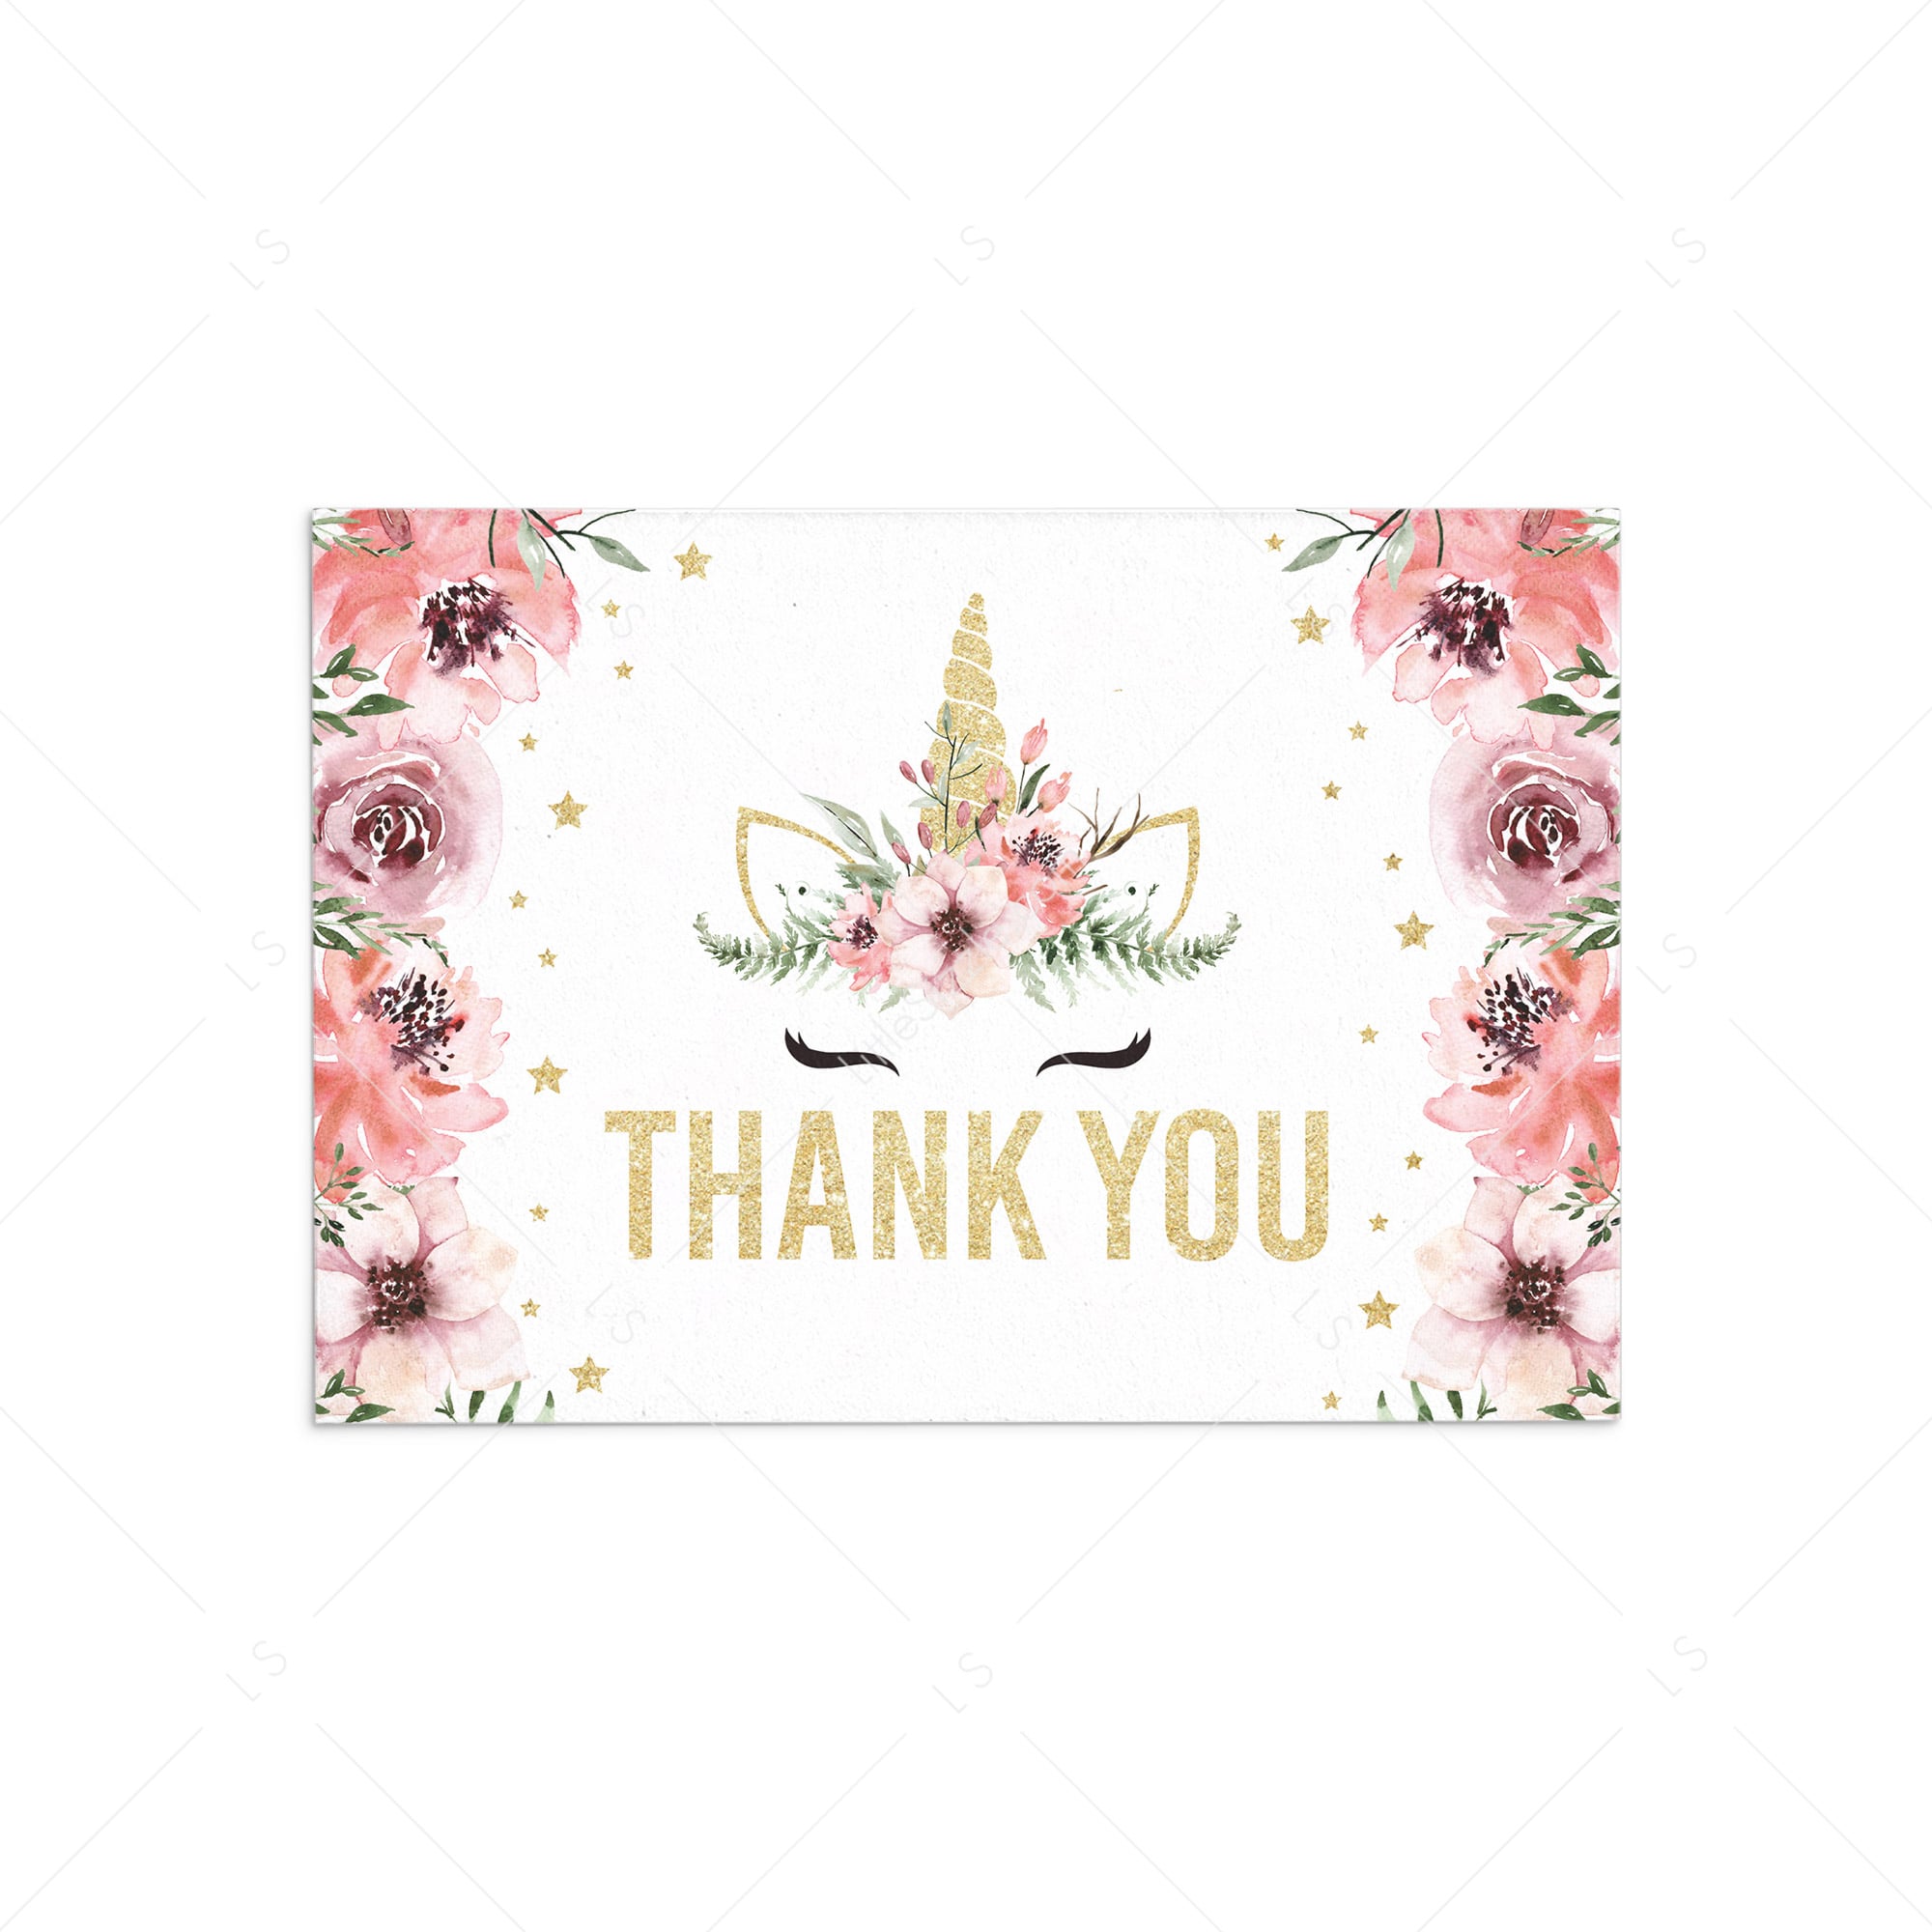 Unicorn thank you note cards printables by LittleSizzle